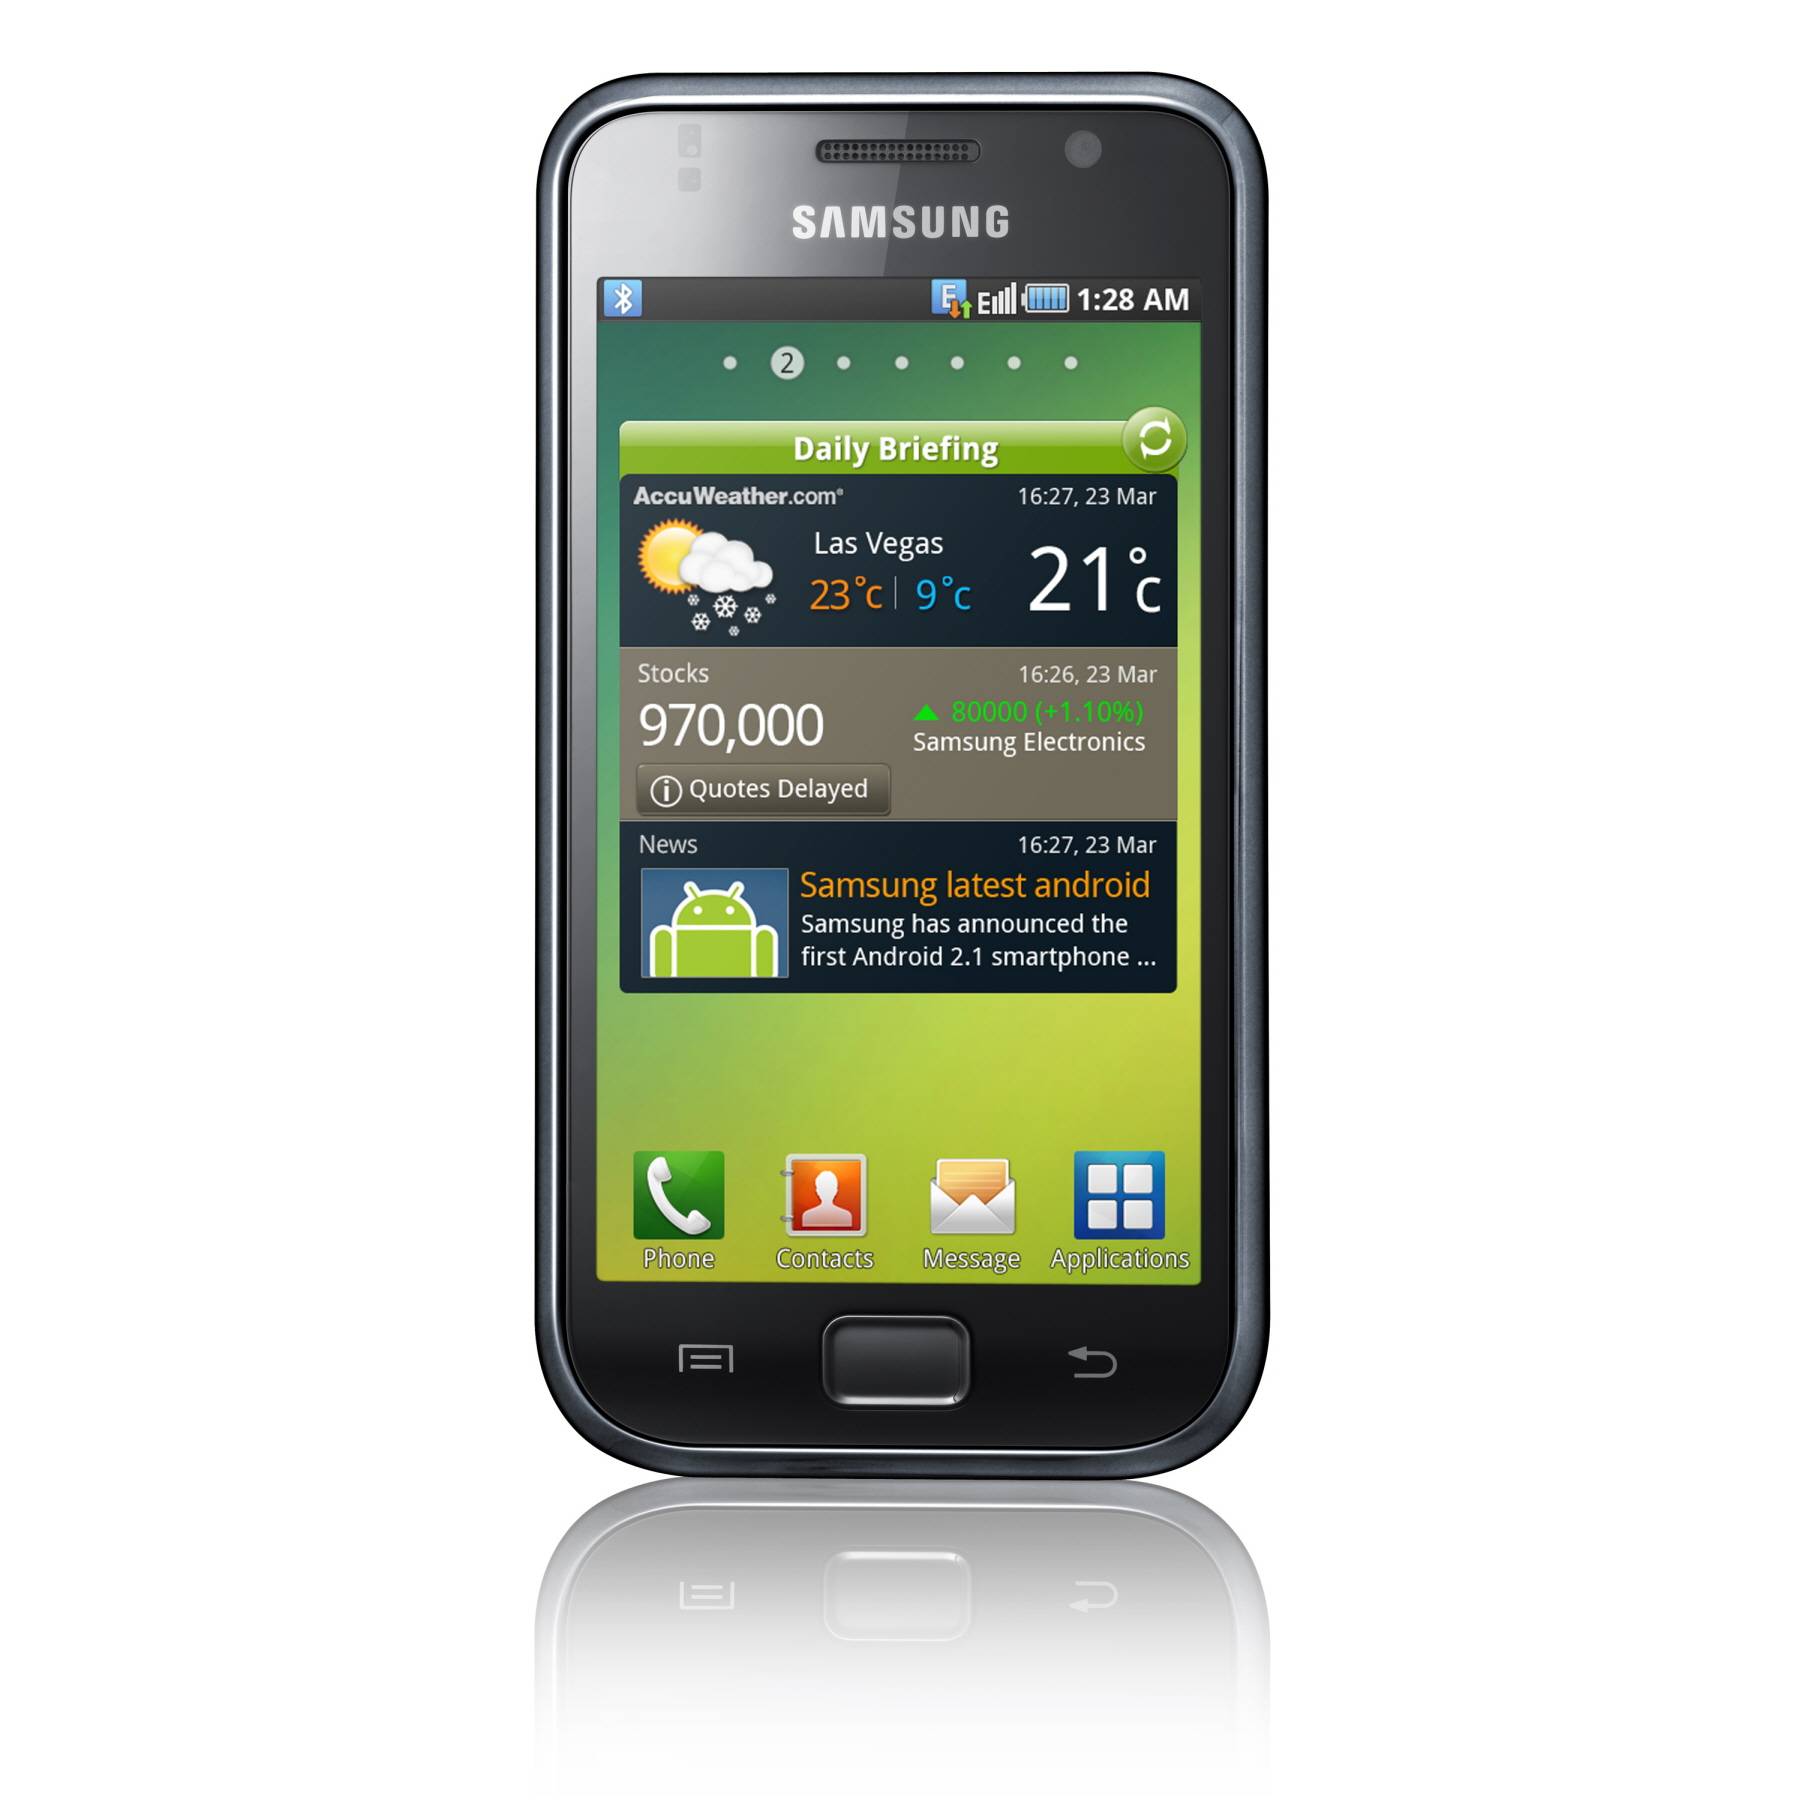 Samsung Galaxy S: Official, Android 2.1, and 4-Inch Super AMOLED ...